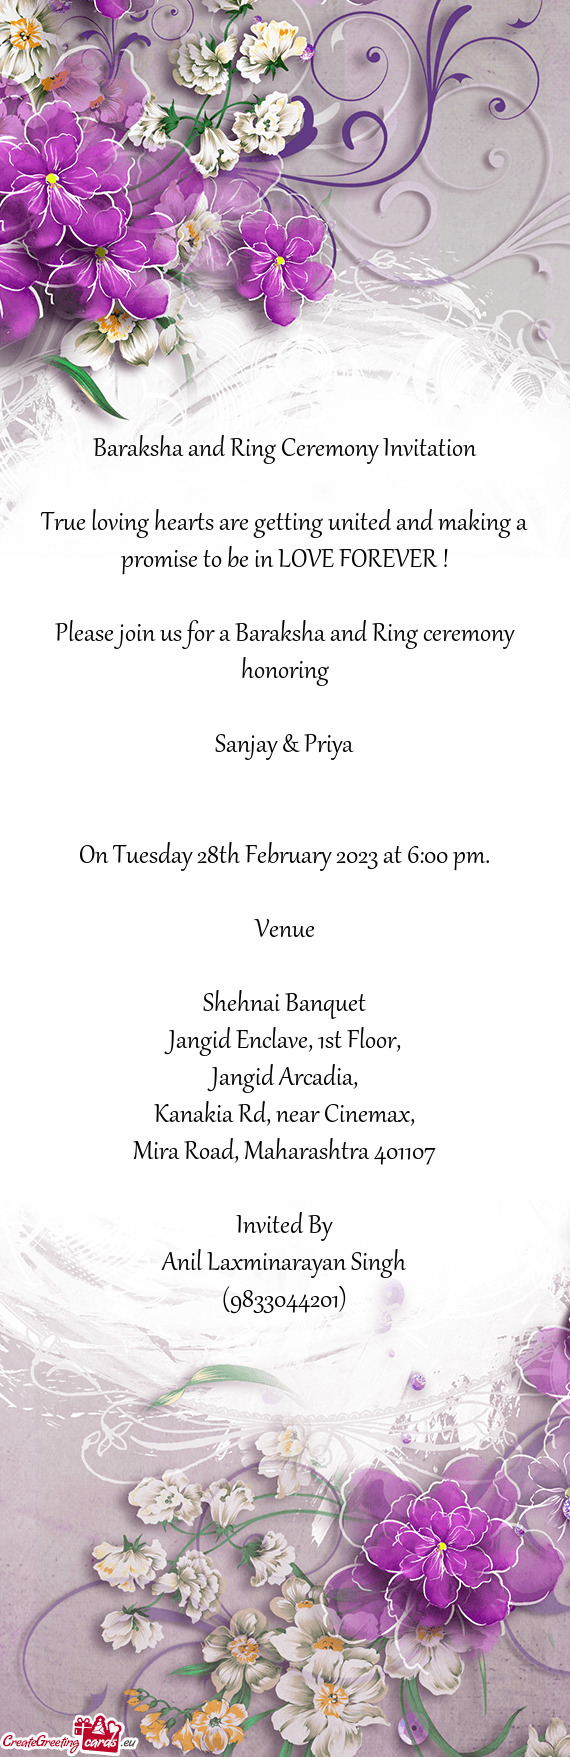 Please join us for a Baraksha and Ring ceremony honoring